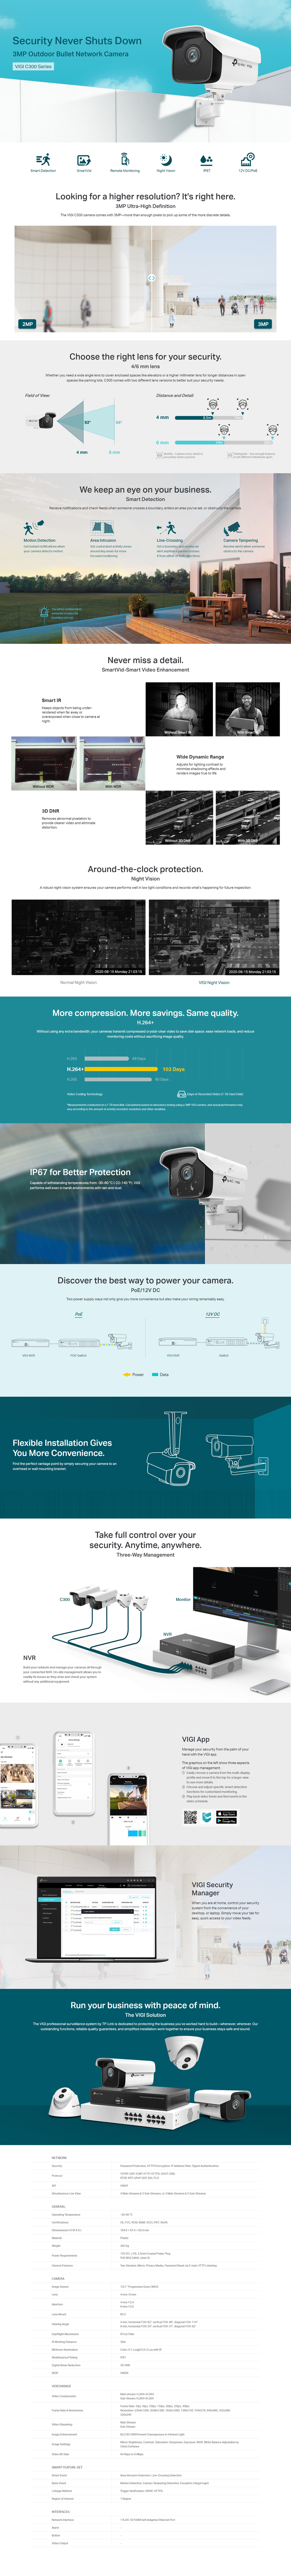 A large marketing image providing additional information about the product TP-Link VIGI C300HP VIGI 3MP Outdoor Bullet Network Camera - Additional alt info not provided